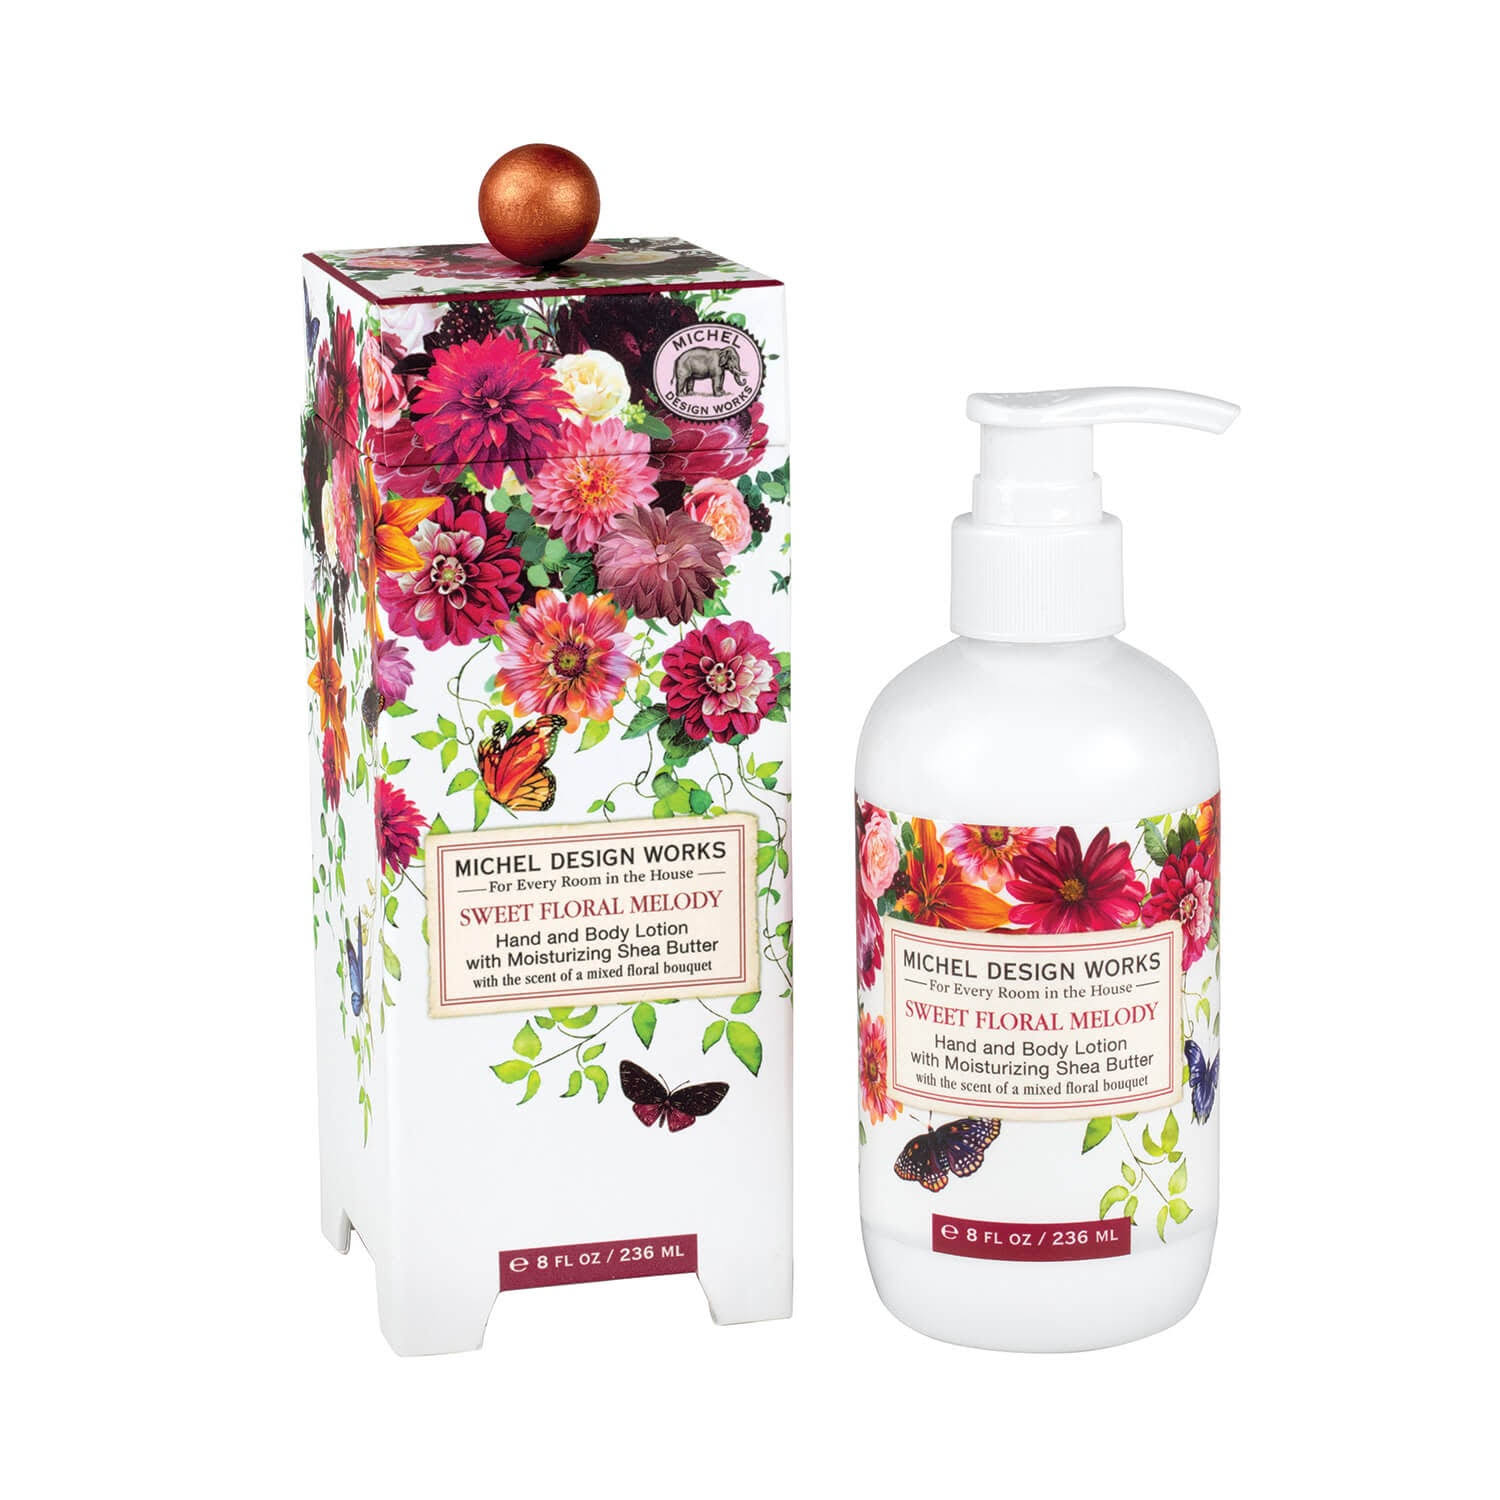 Michel Design Works Sweet Floral Melody Lotion